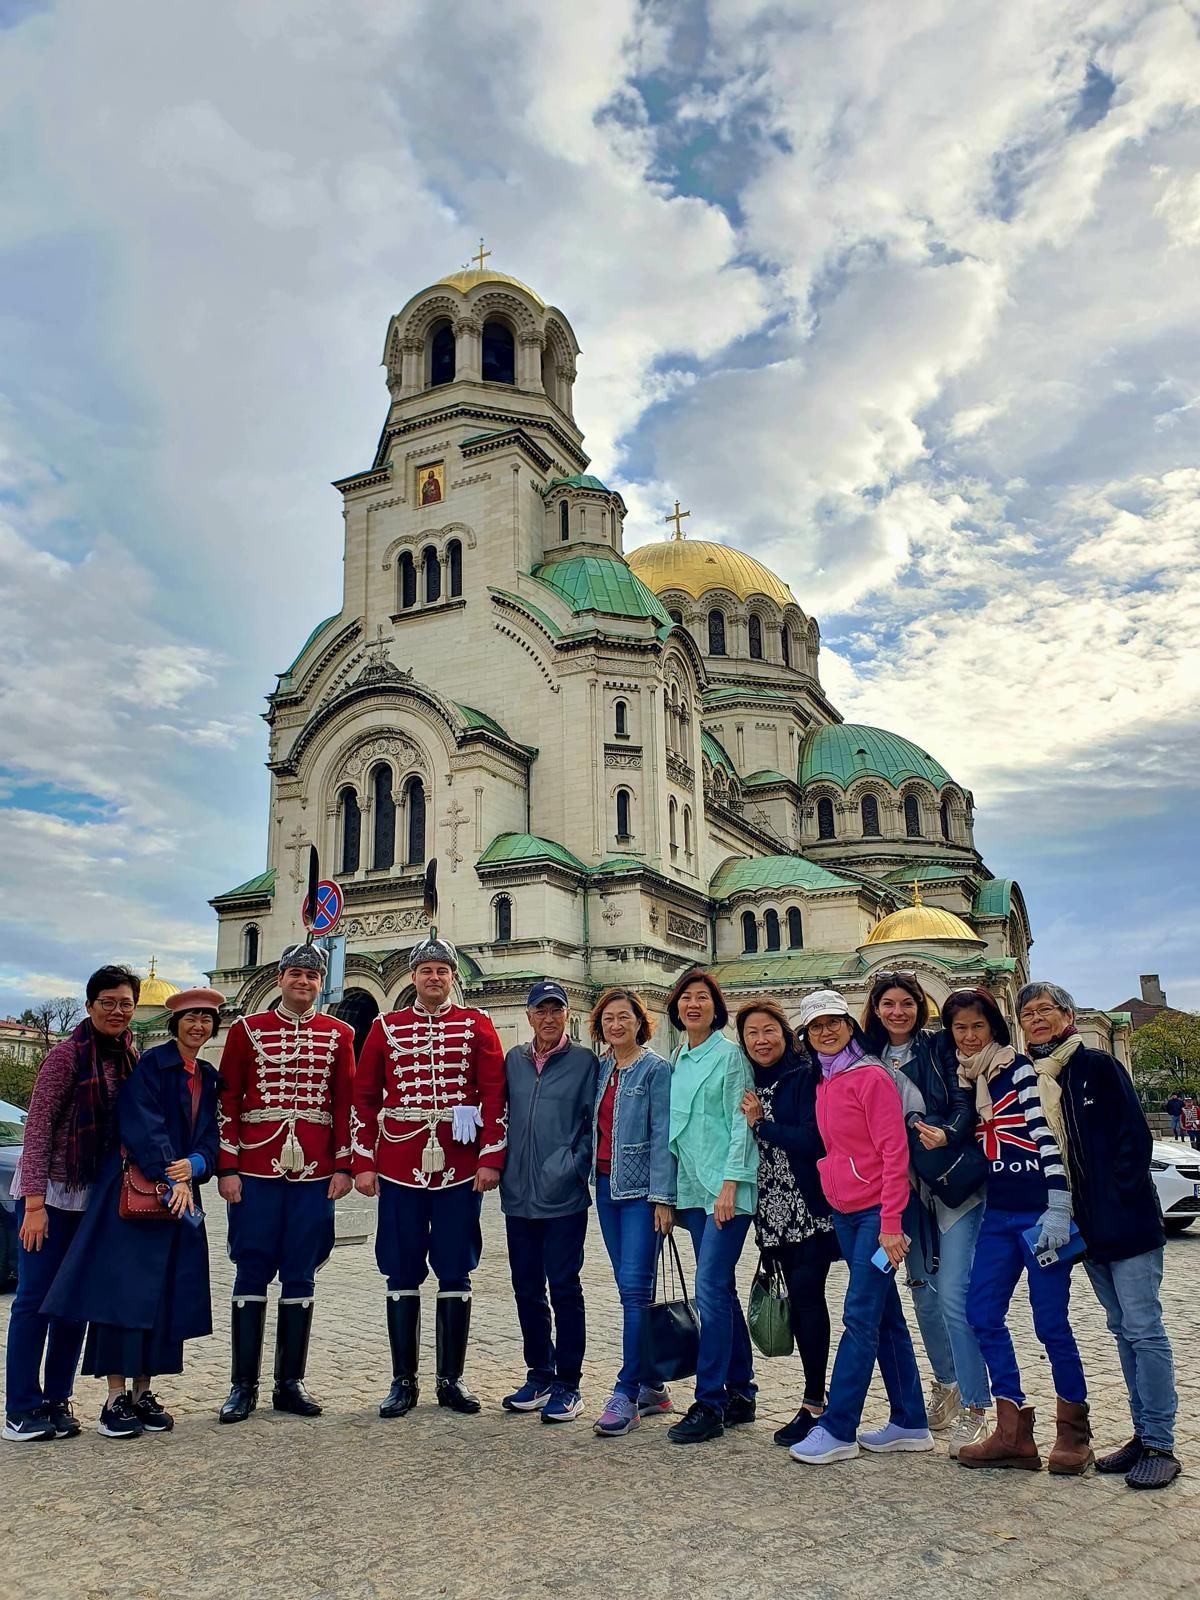 Tourists from different continents explore Europe